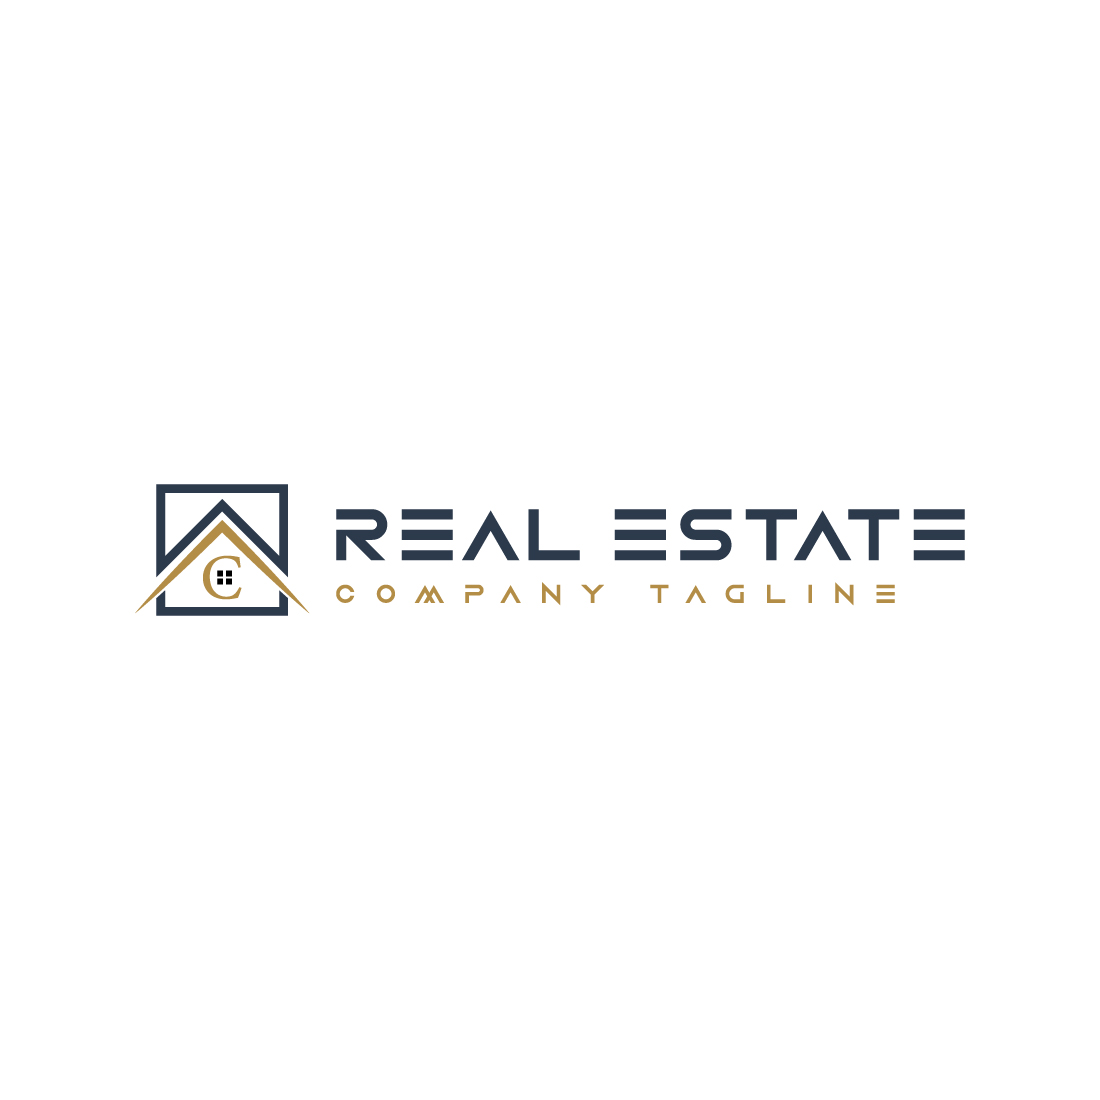 Real estate logo with golden, dark blue color and letter c cover image.